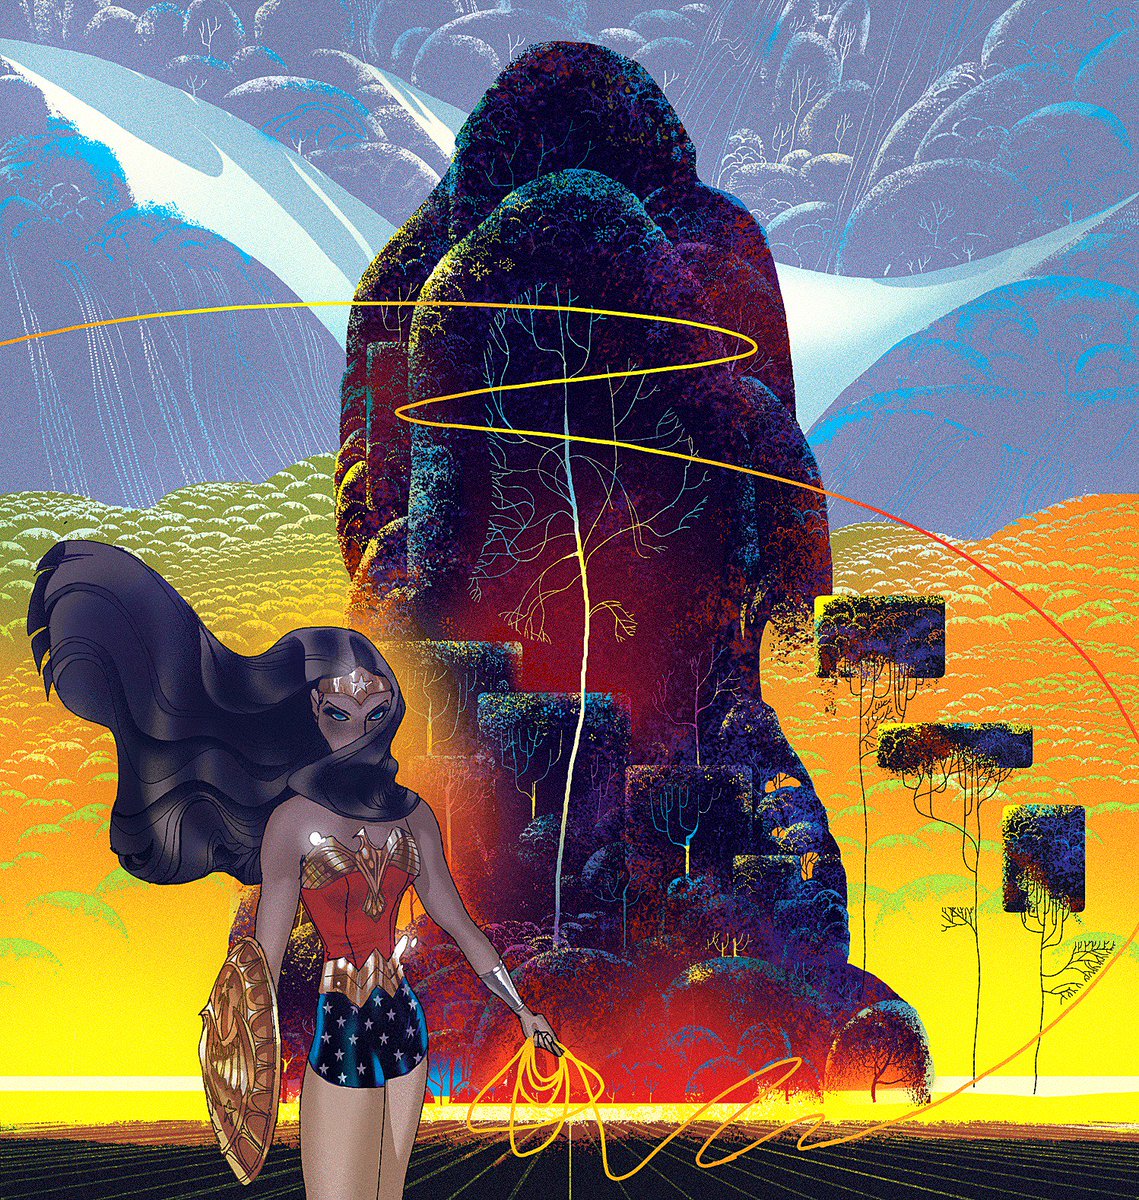 Couldn't think of a better way to start 2019 than with some Wonder Woman art